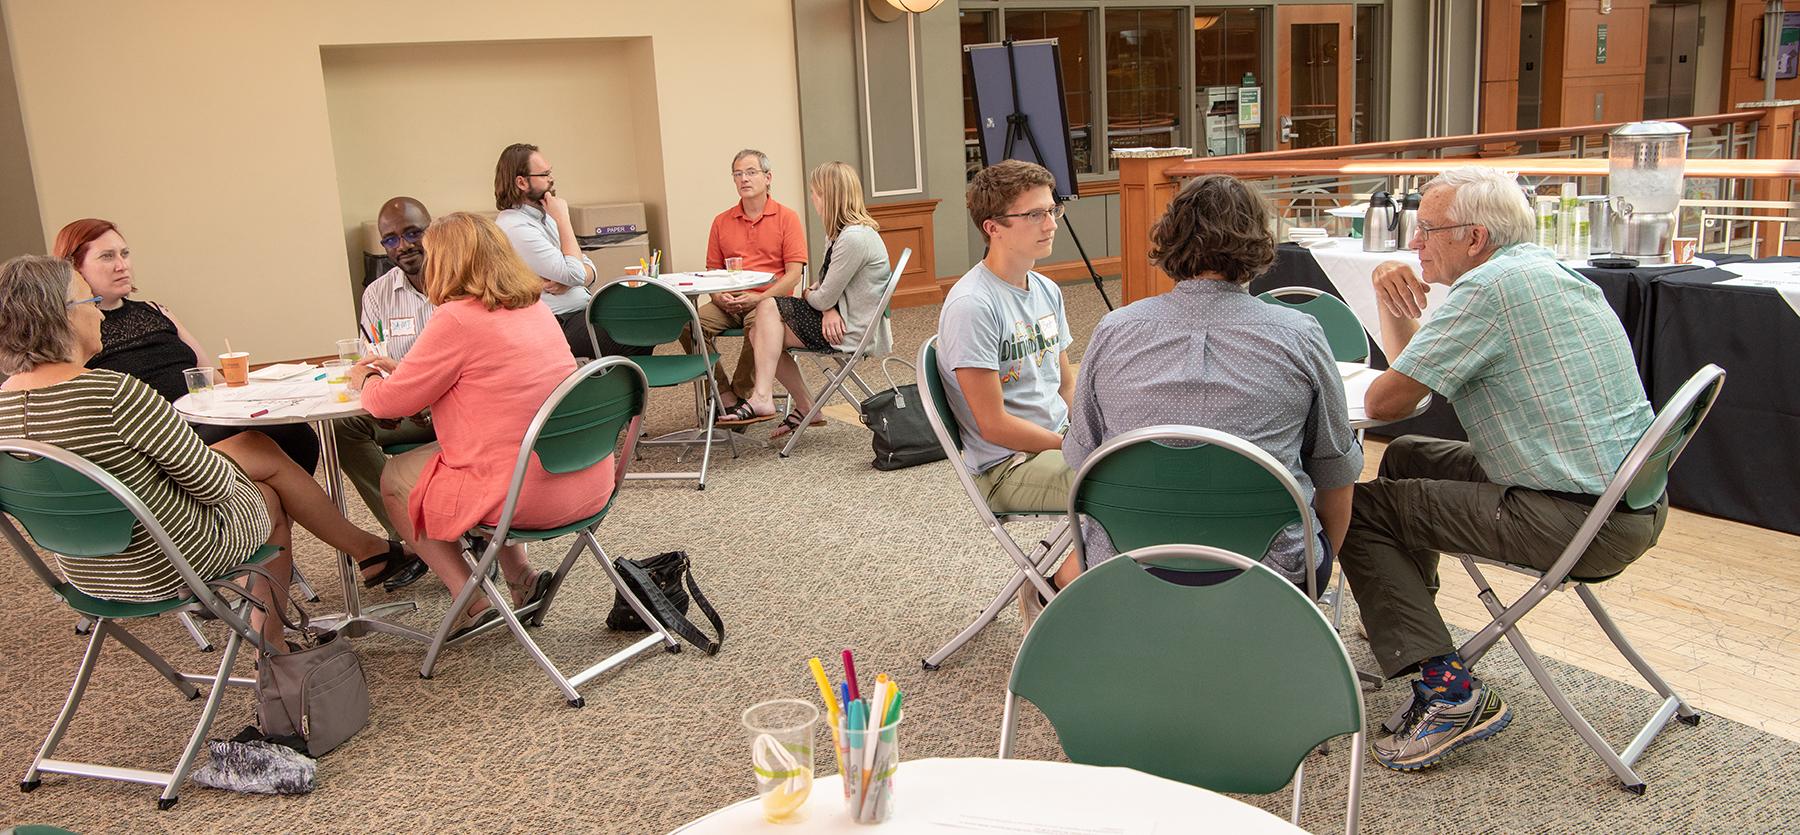 Faculty and community members engage in discussion during an Open OHIO gathering